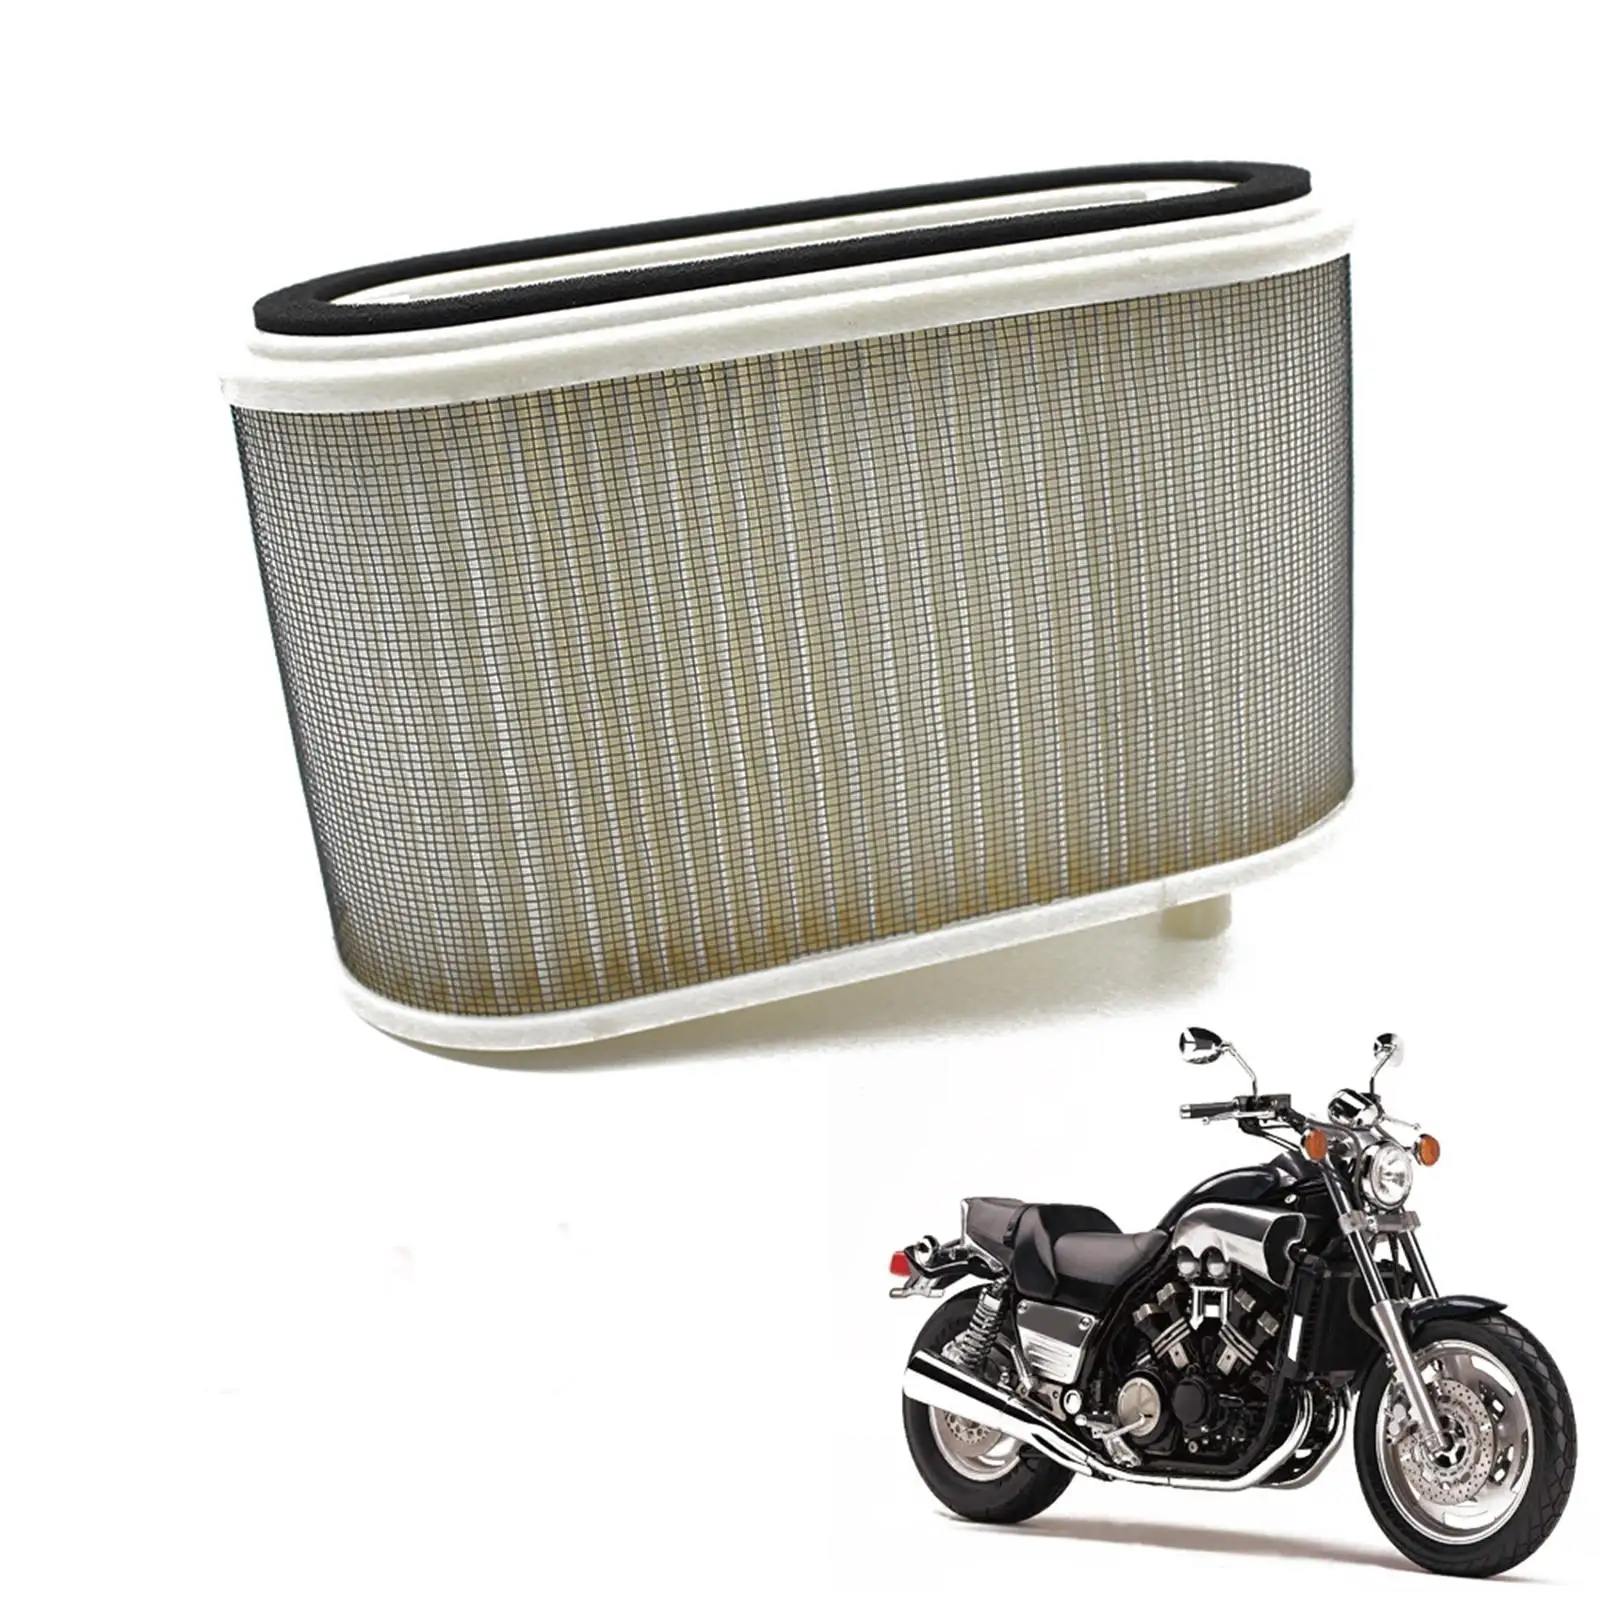 Air Filter Spare Parts Replaces Accessories Hfa4910 for Yamaha Vmx1200 85